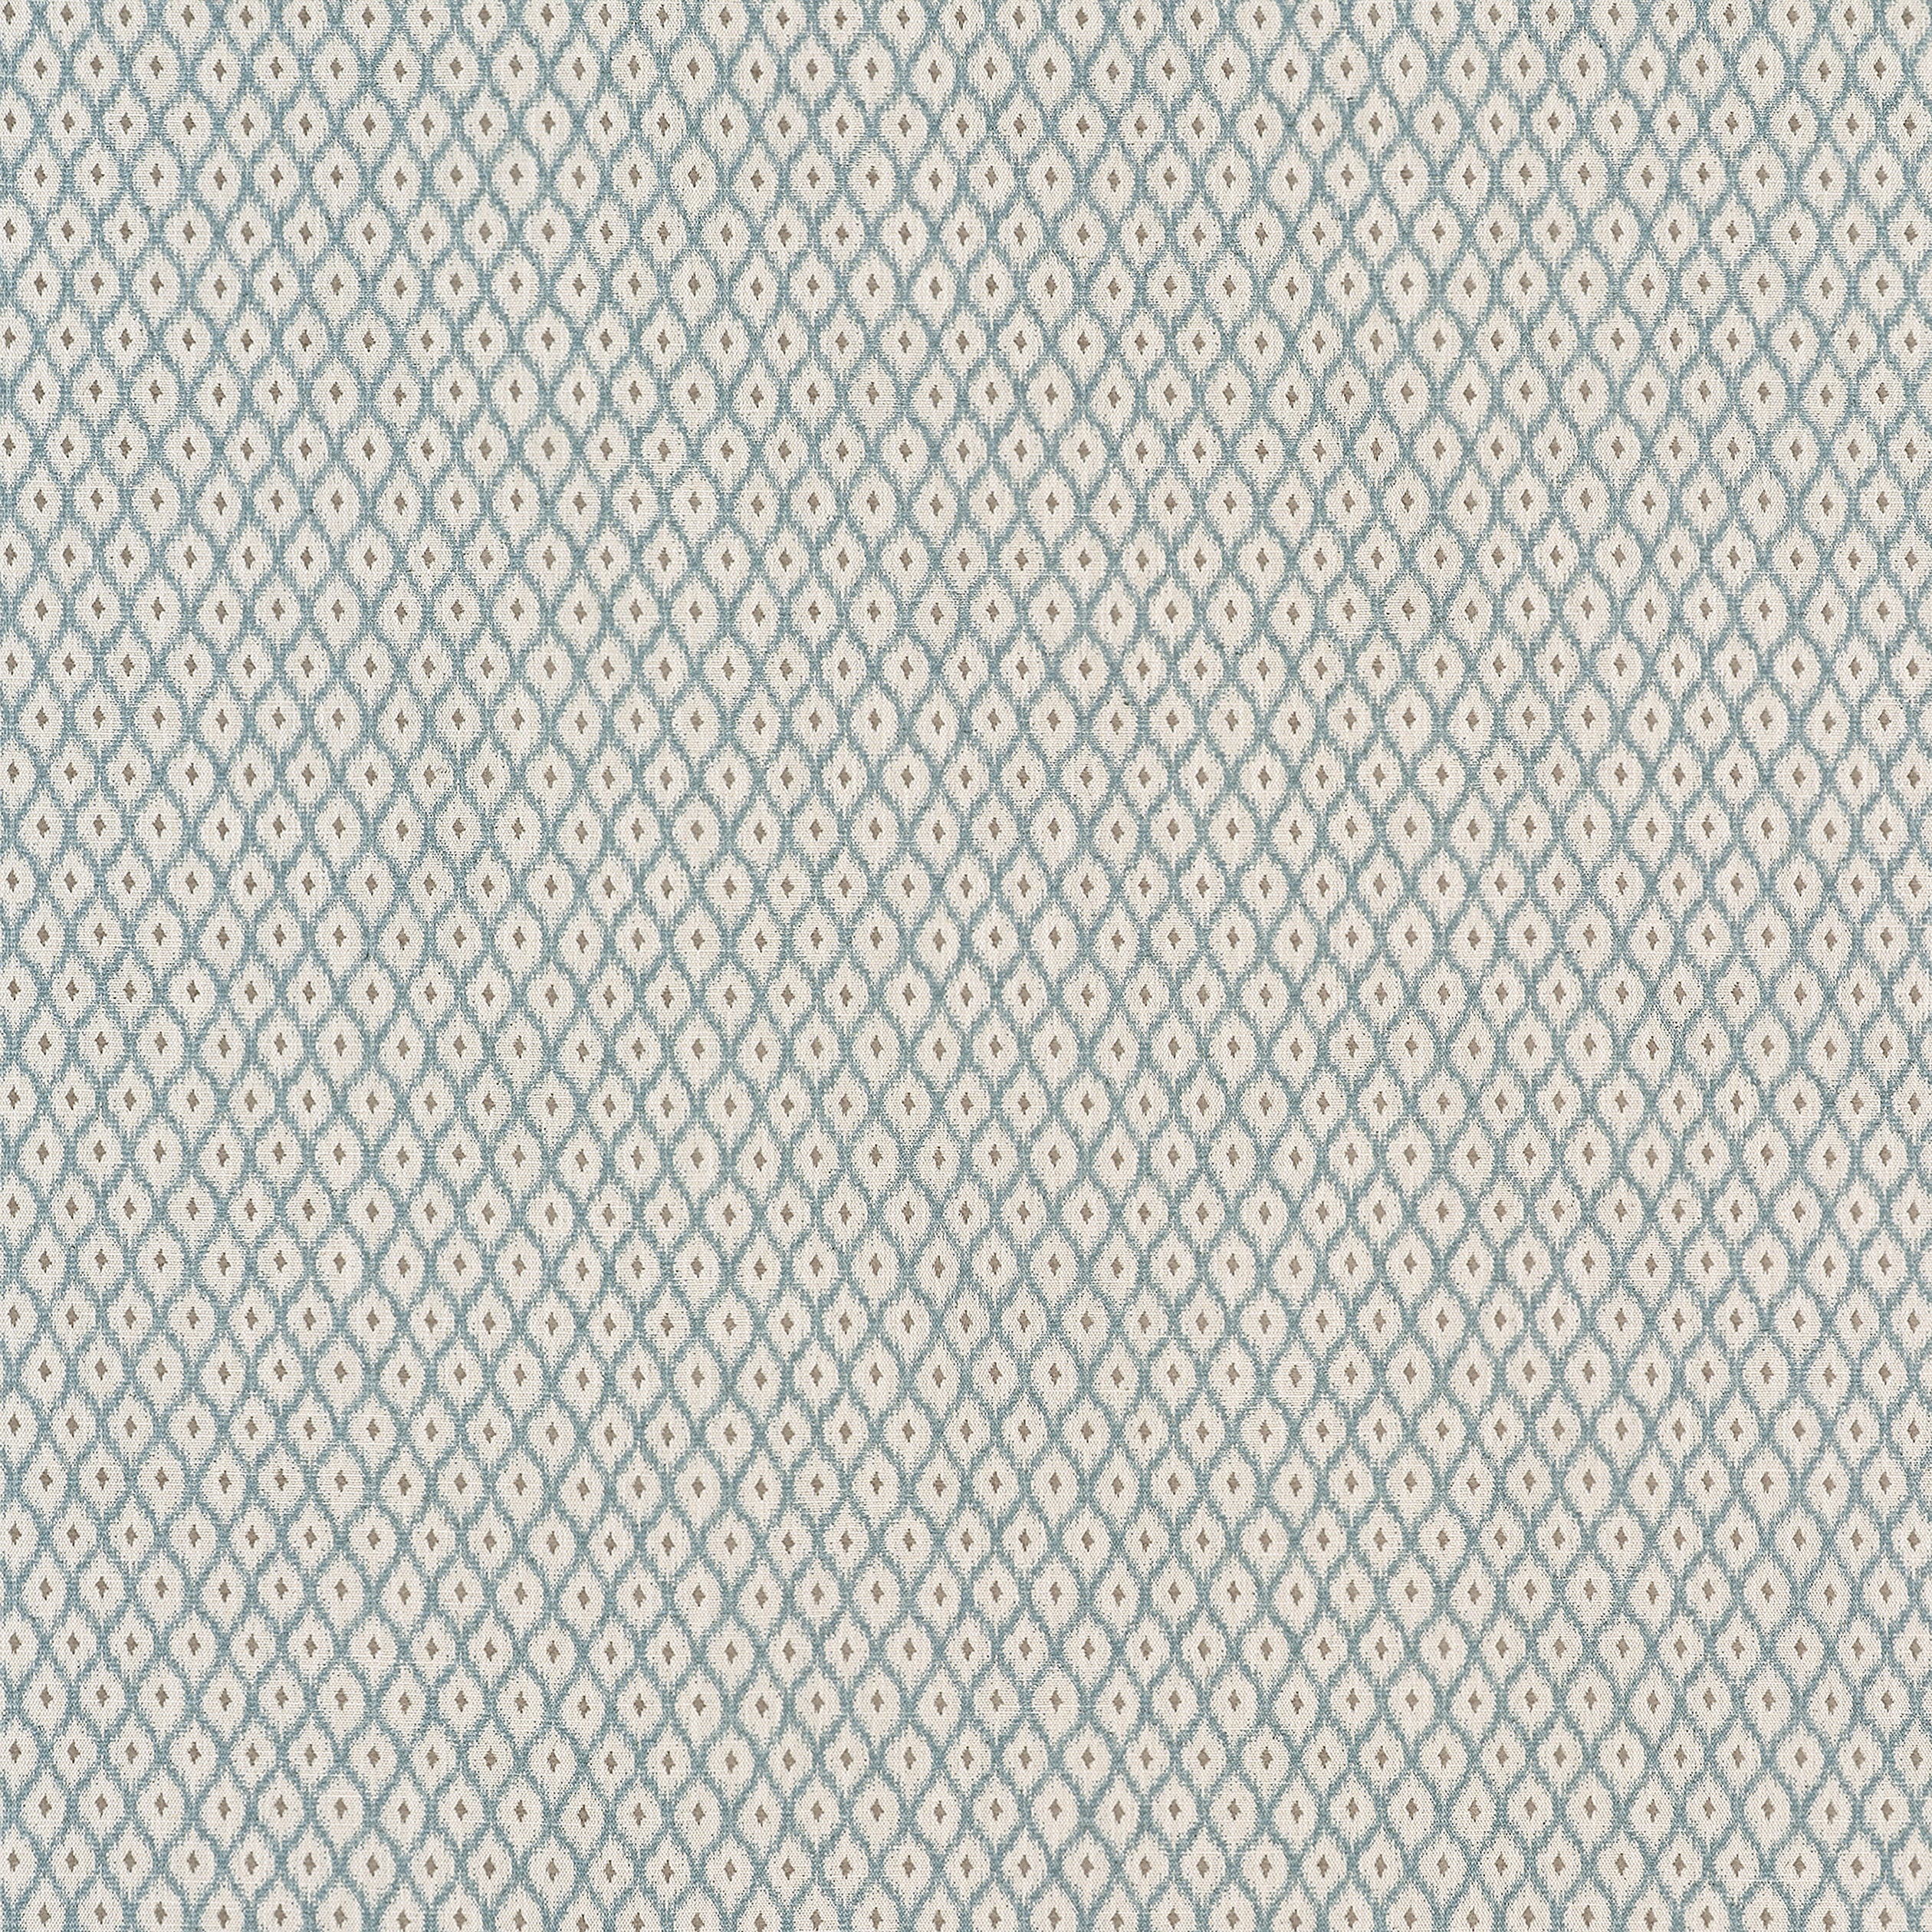 Josephine fabric in mineral color - pattern number W81903 - by Thibaut in the Companions collection